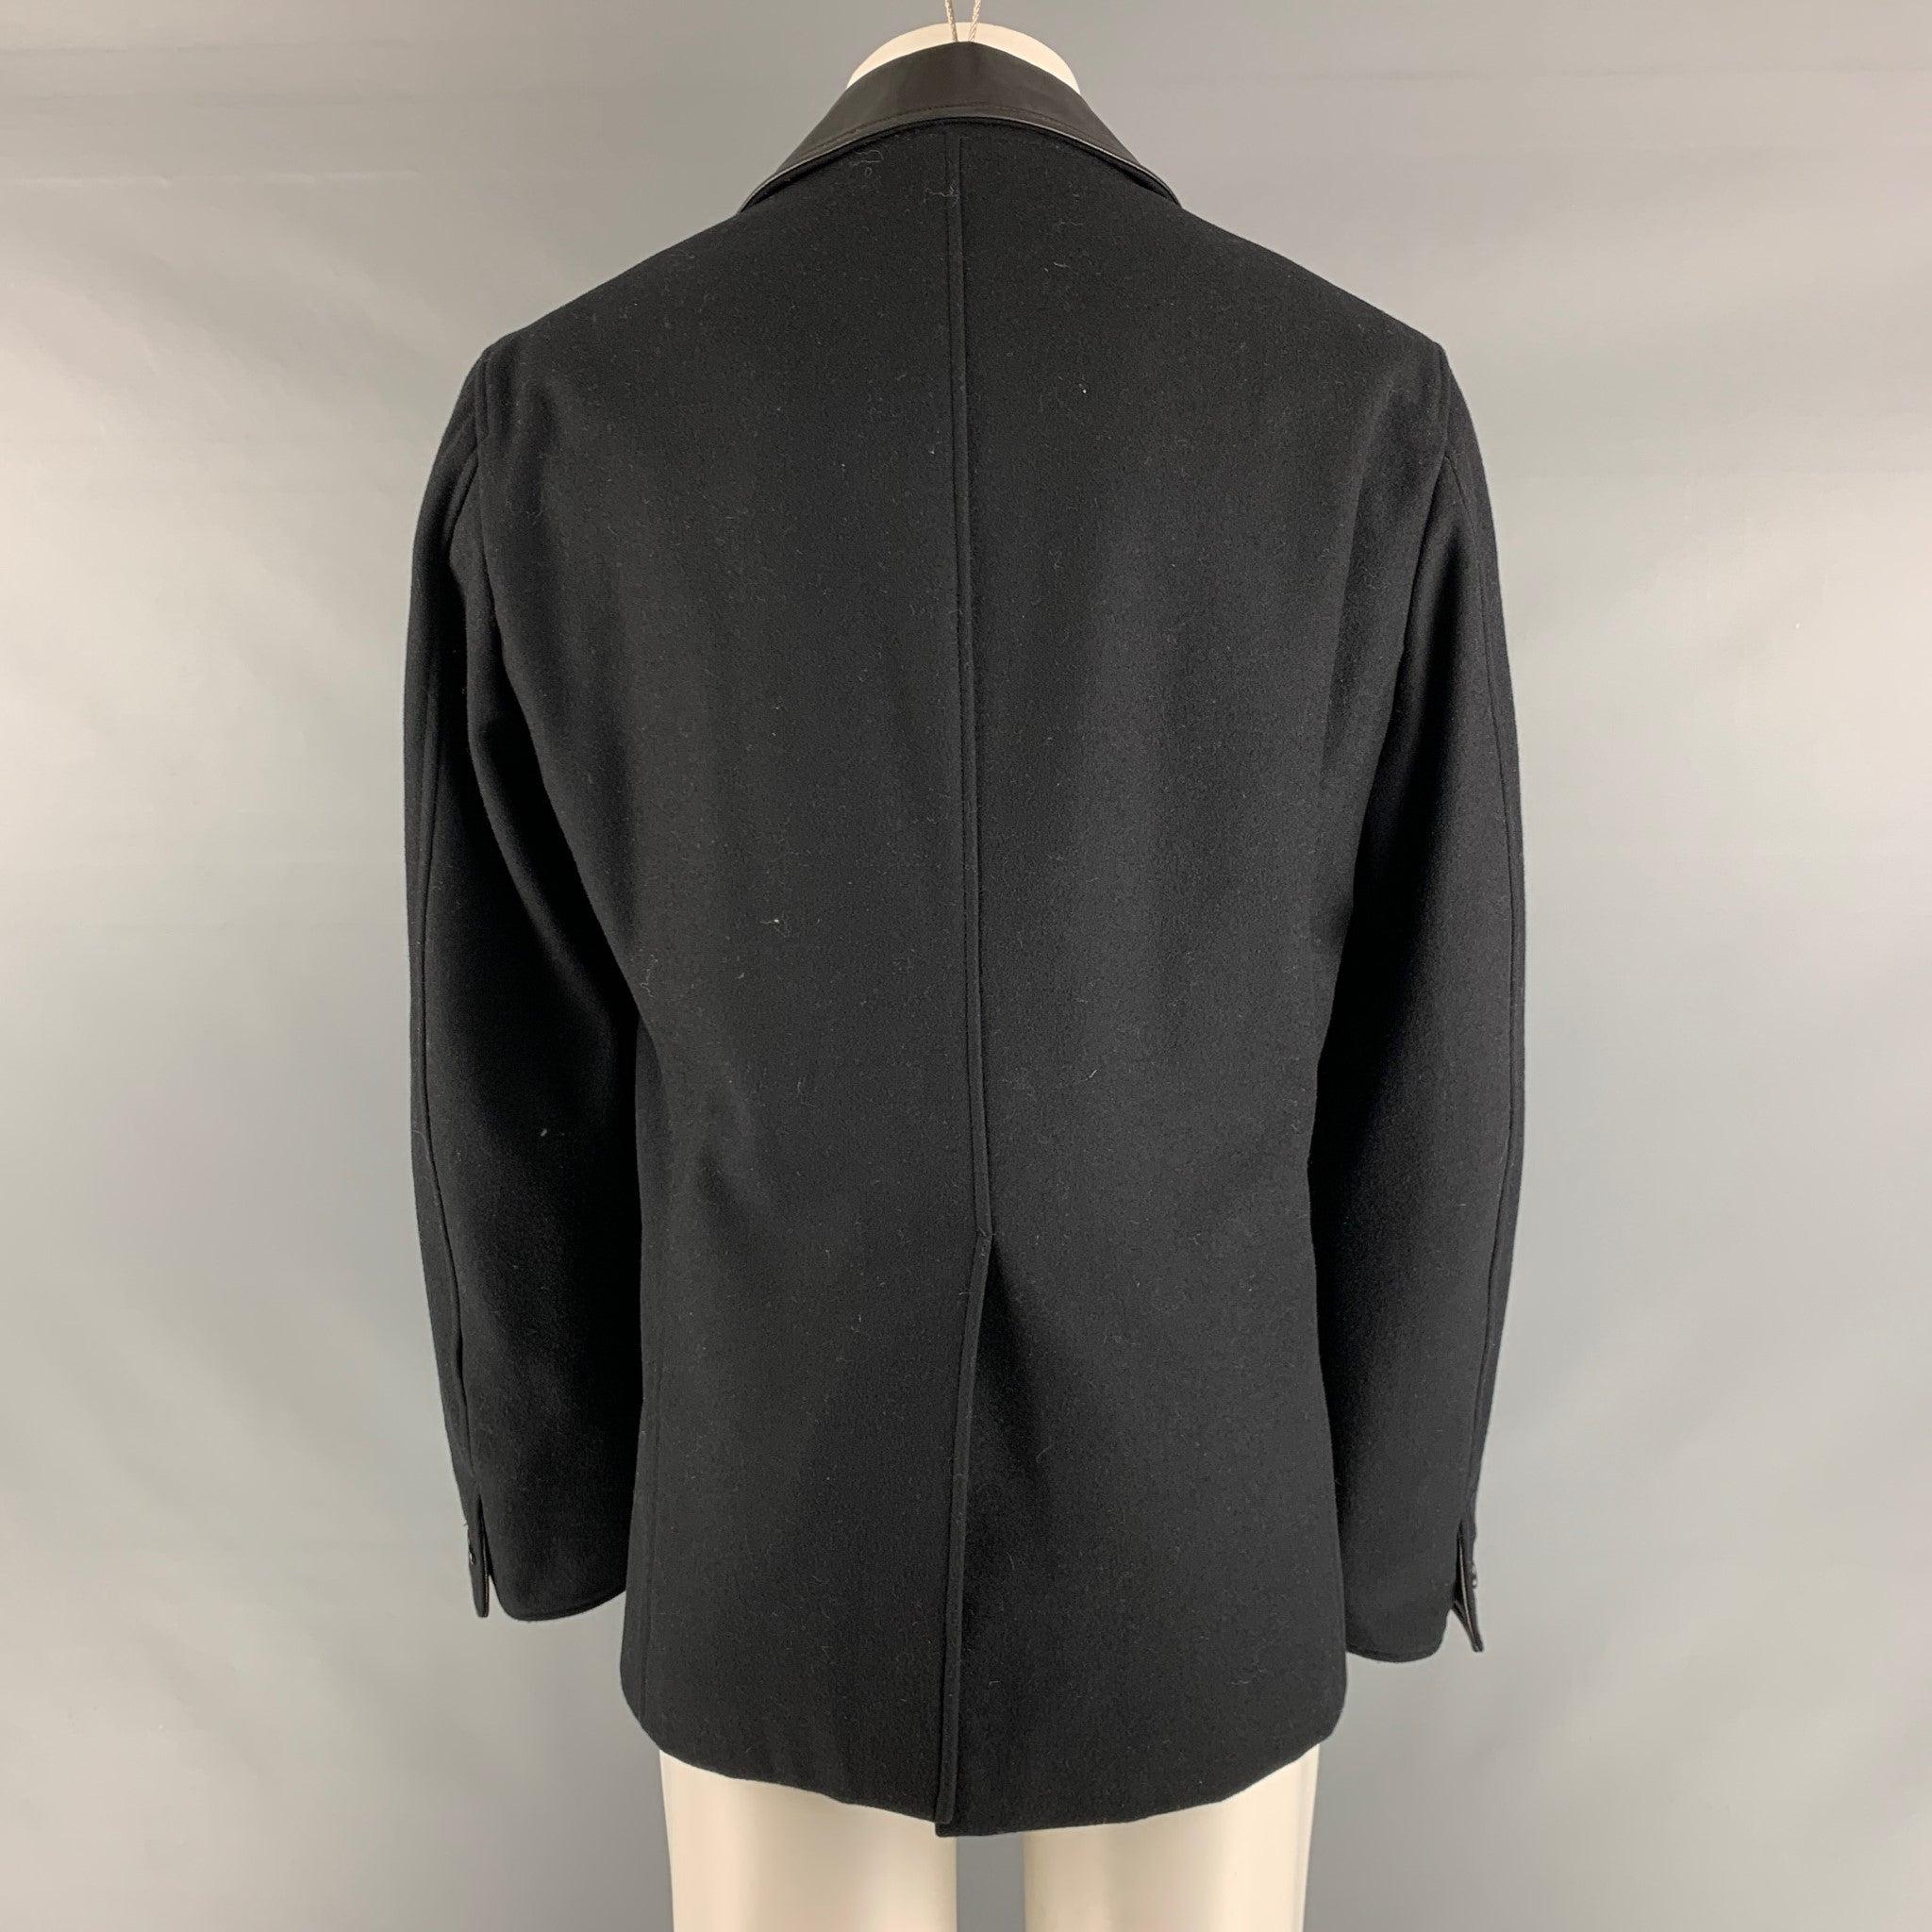 JIL SANDER Size 40 Black Solid Wool Blend Peacoat Coat In Good Condition For Sale In San Francisco, CA